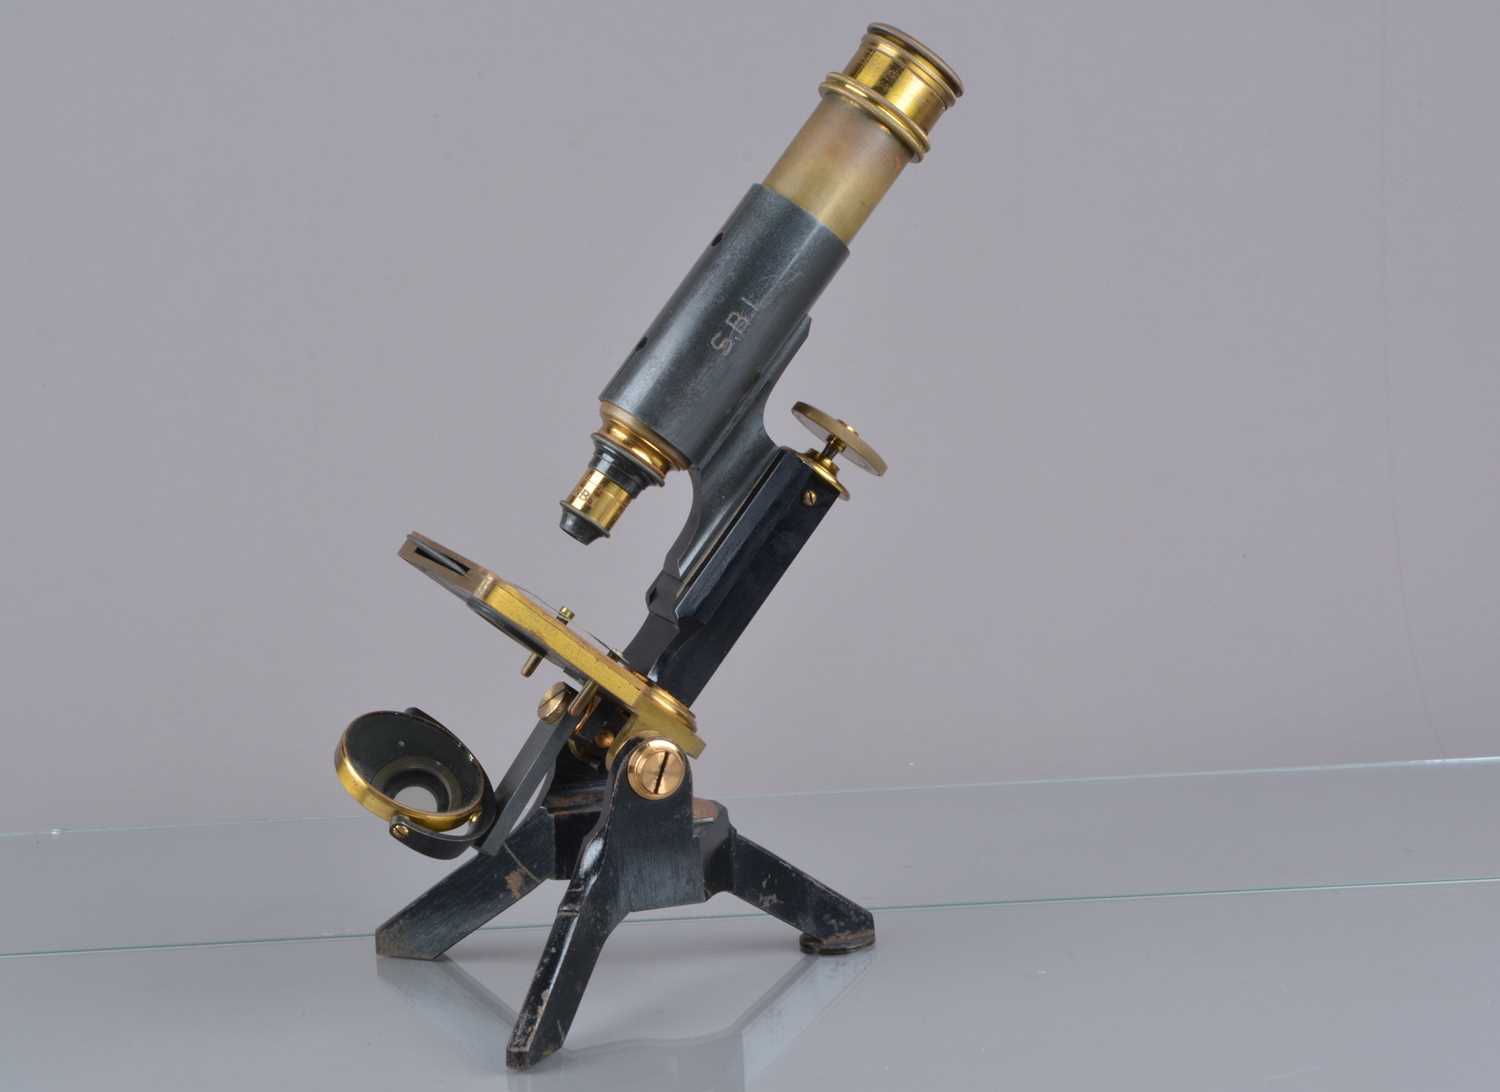 Lot 3 - A late-19th Century lacquered and black-enamelled brass Compound Monocular Microscope engraved Jas Parkes & Son Birmingham